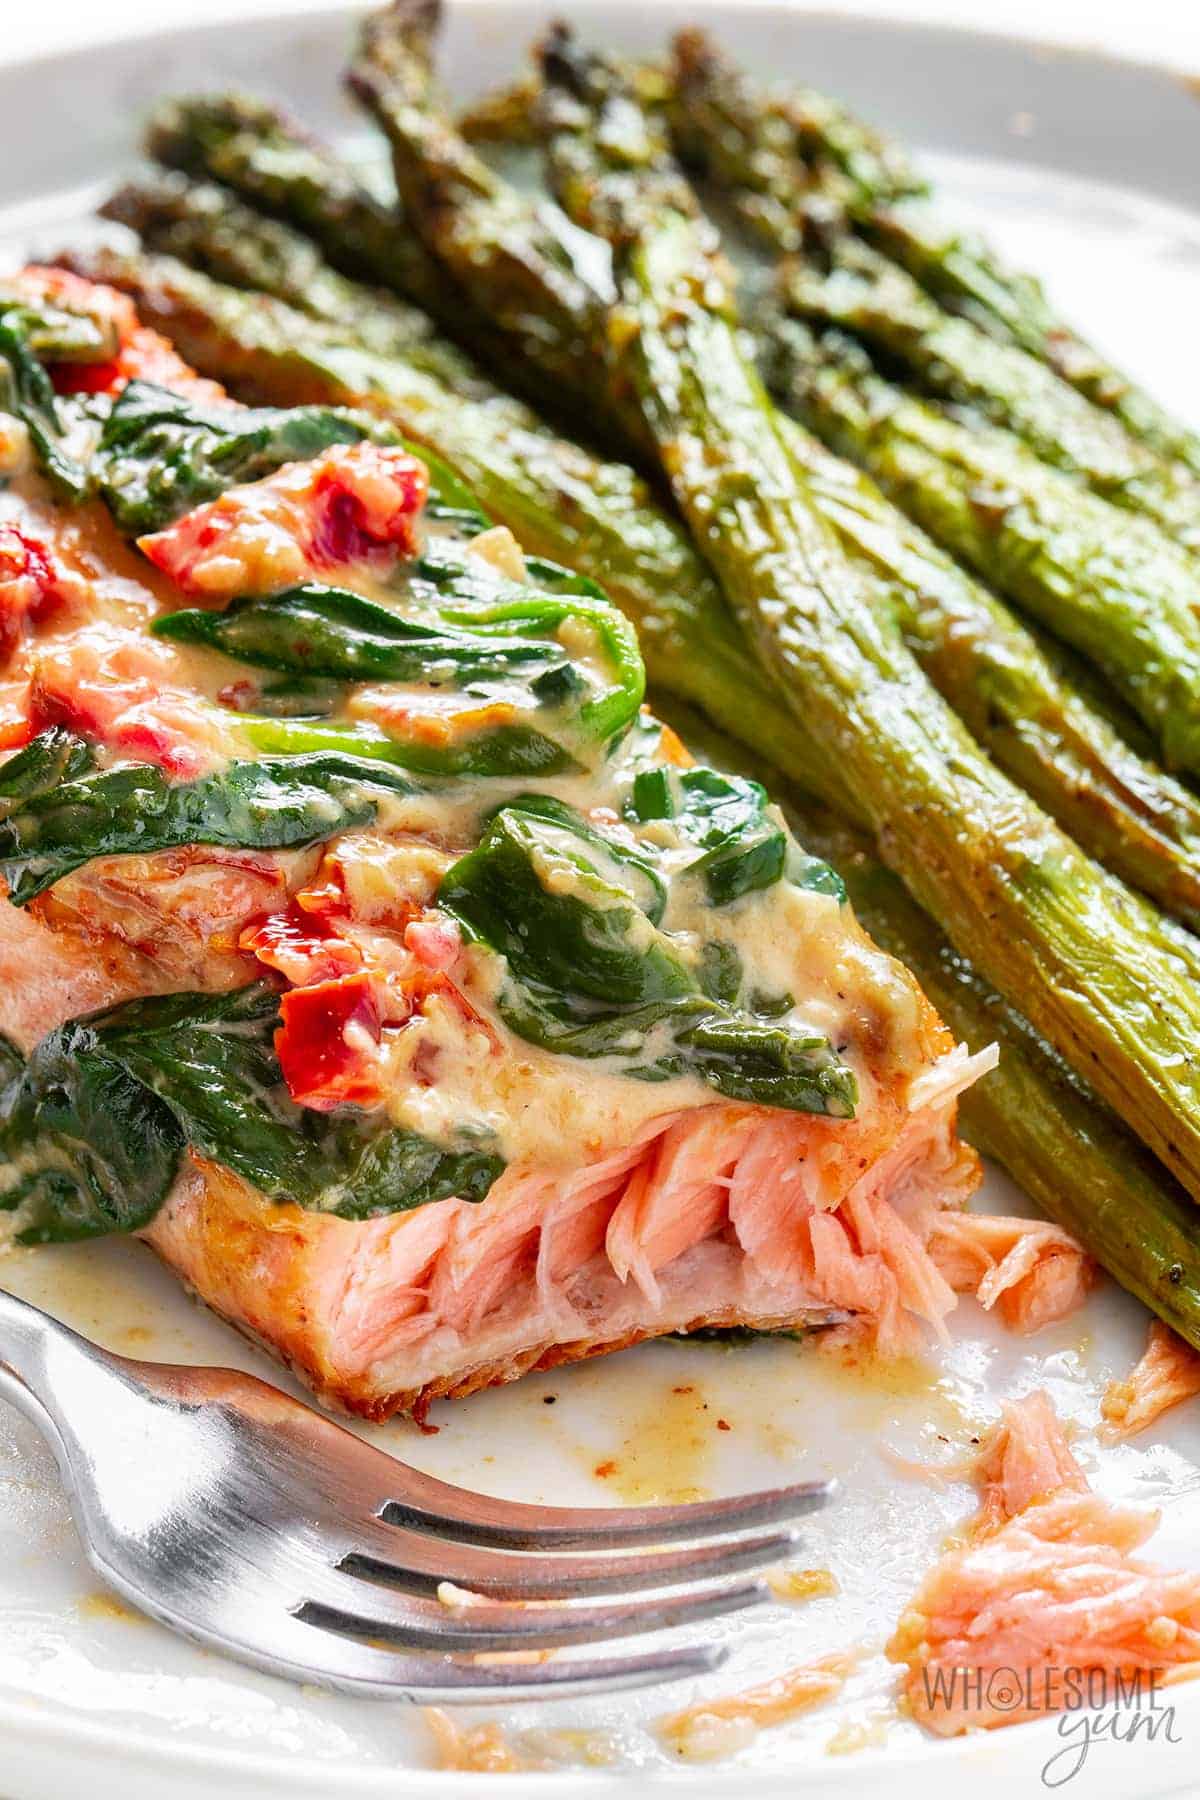 Garlic Tuscan salmon flaked with a fork and asparagus on the side.